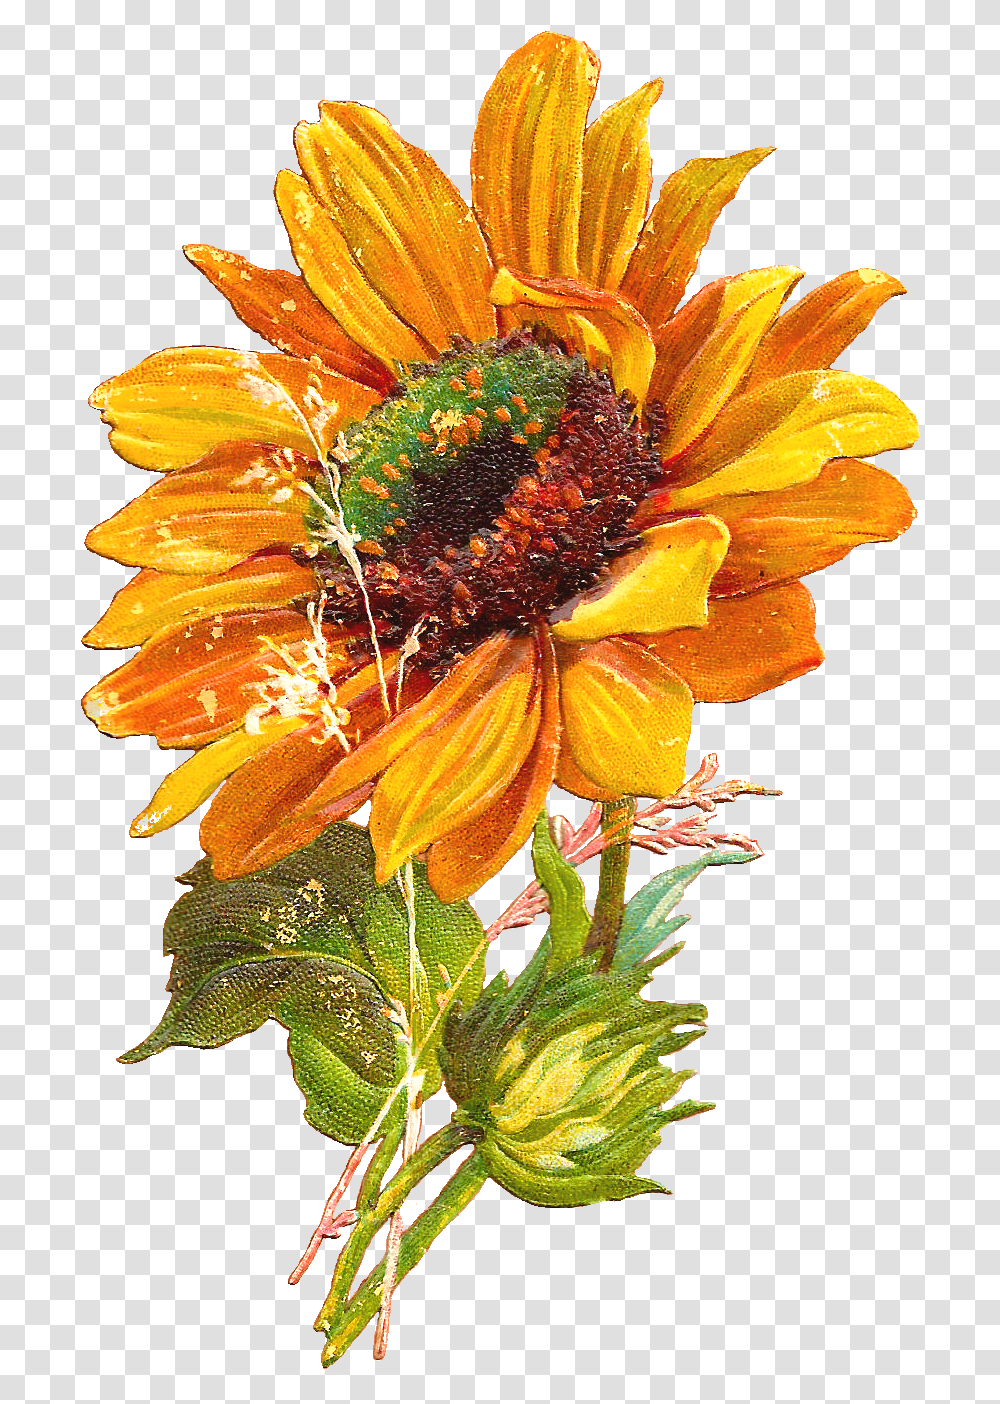 Sunflowers Vector Hello Sunflower Vector, Plant, Blossom, Daisy, Daisies Transparent Png